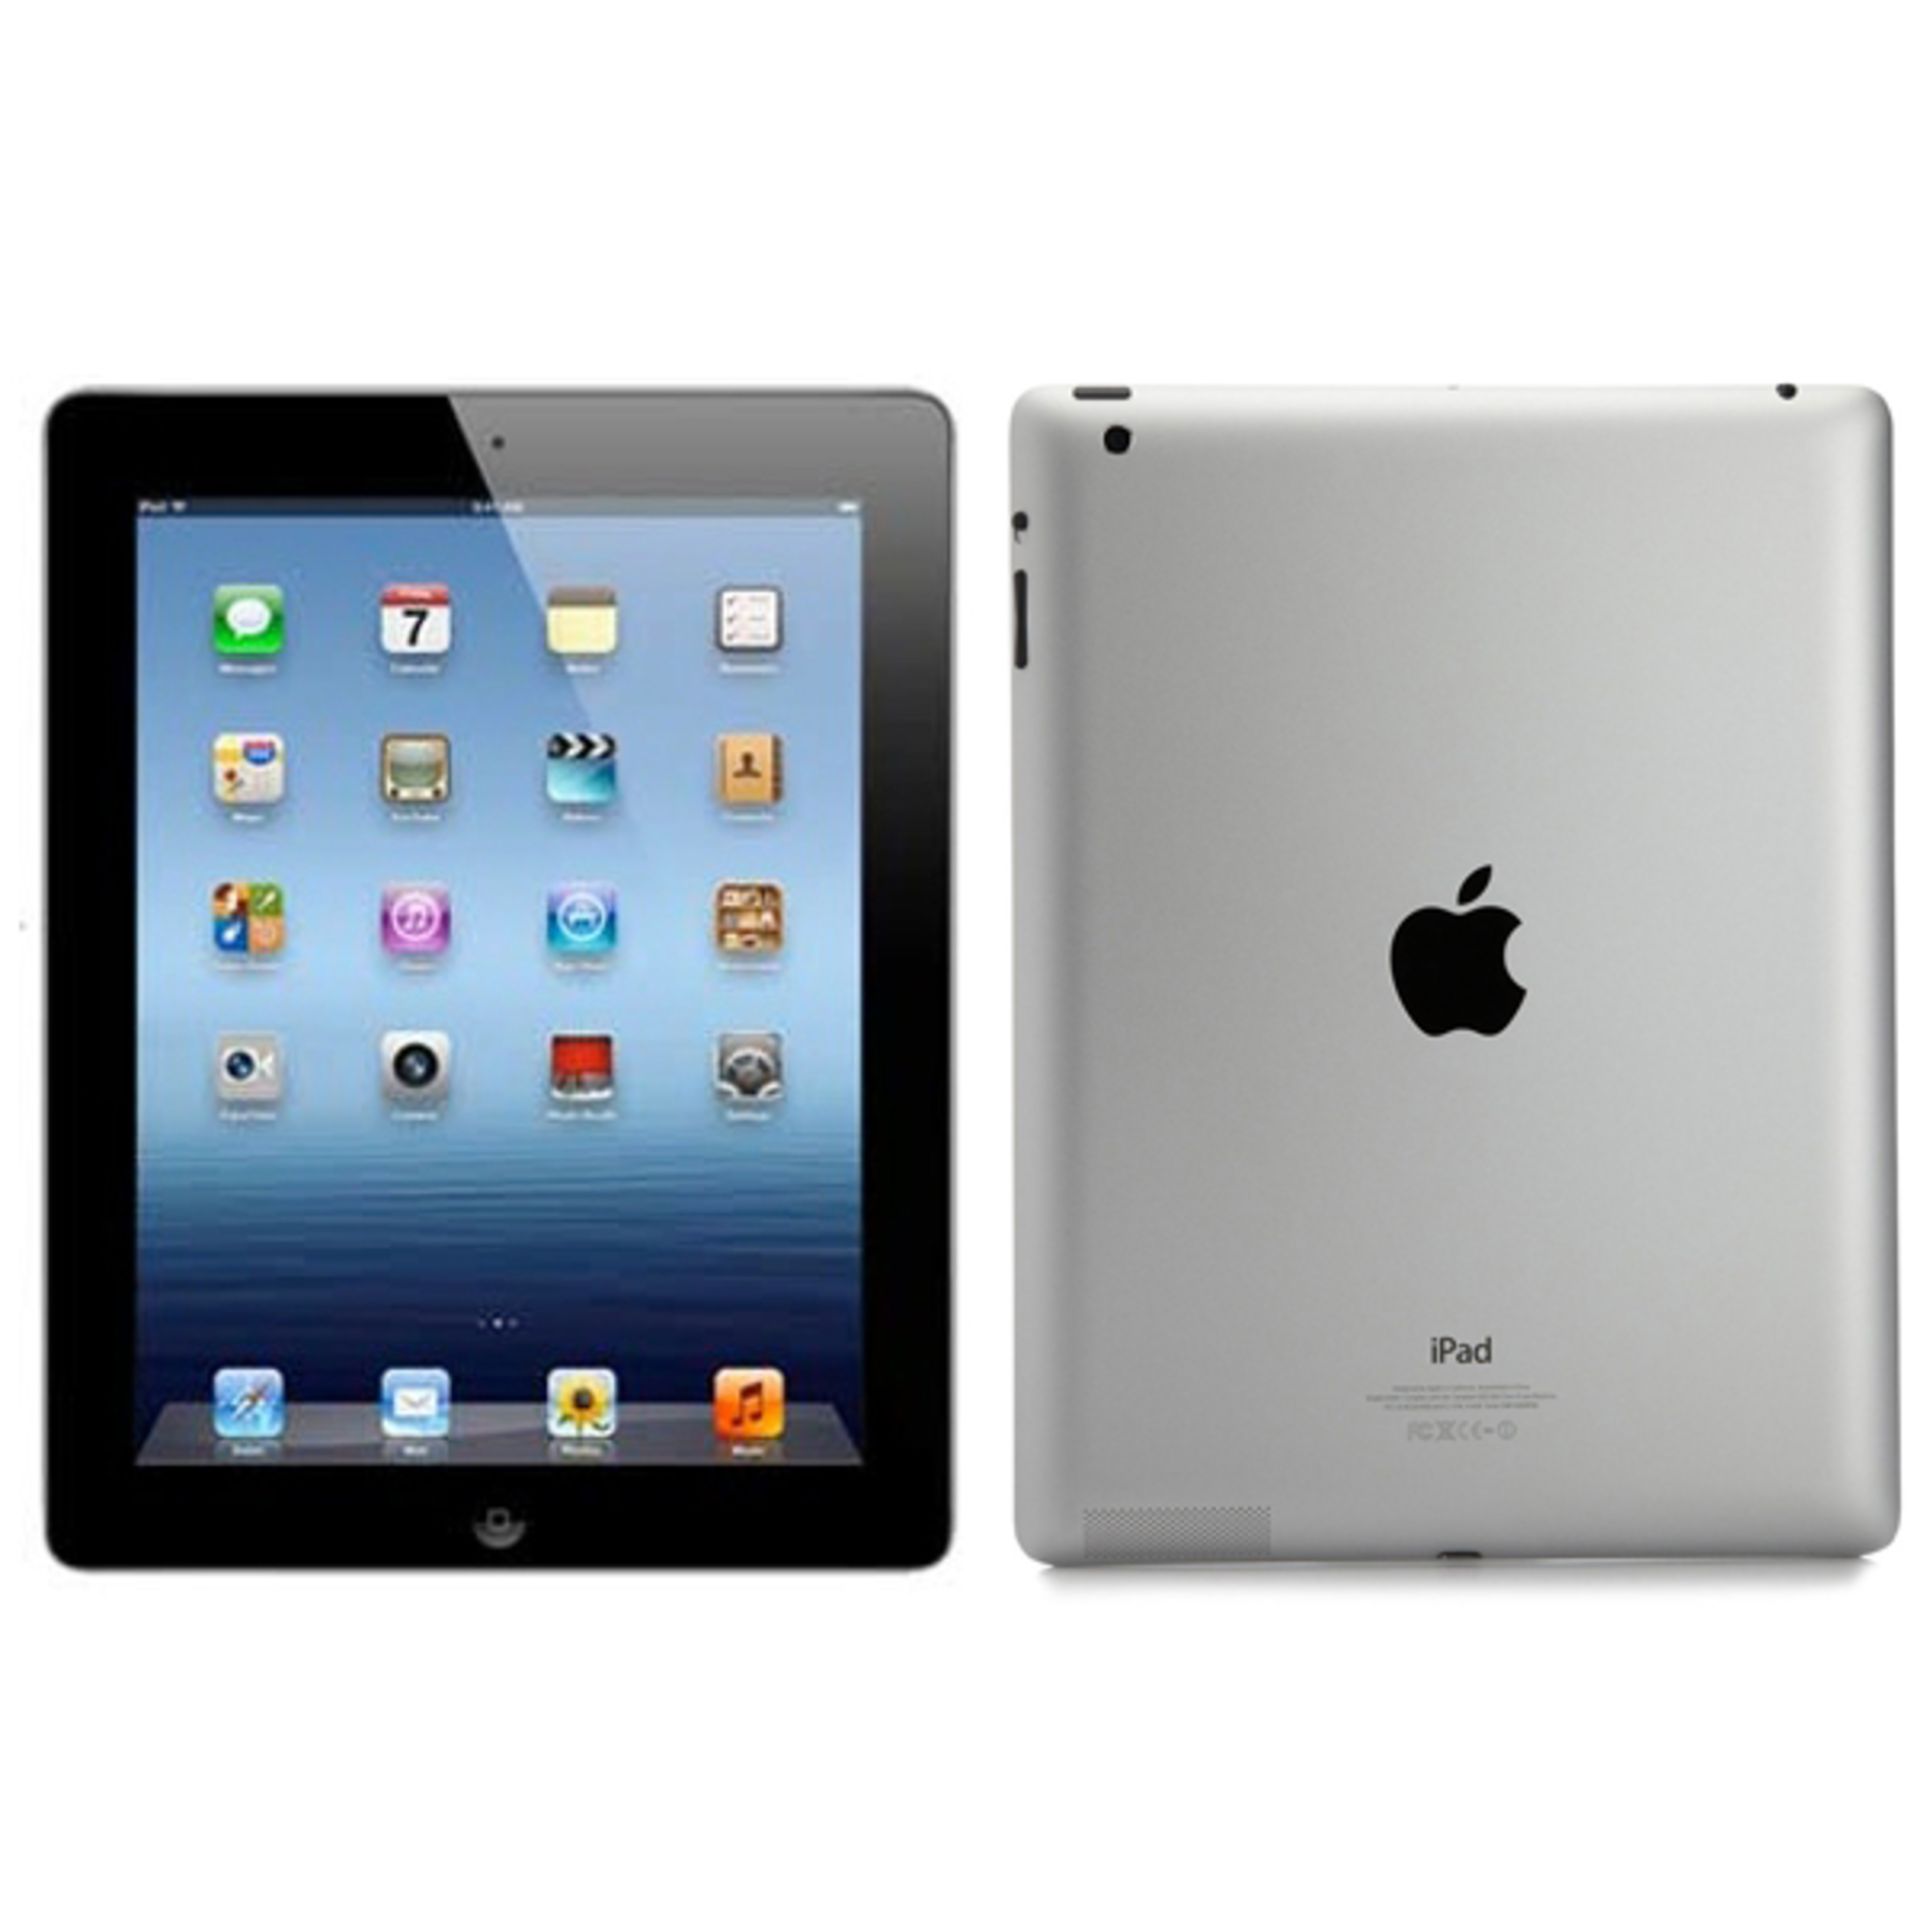 V Grade B Apple iPad 4 16GB WiFi - Generic Box With Charging Cable - Due To This Items Location It